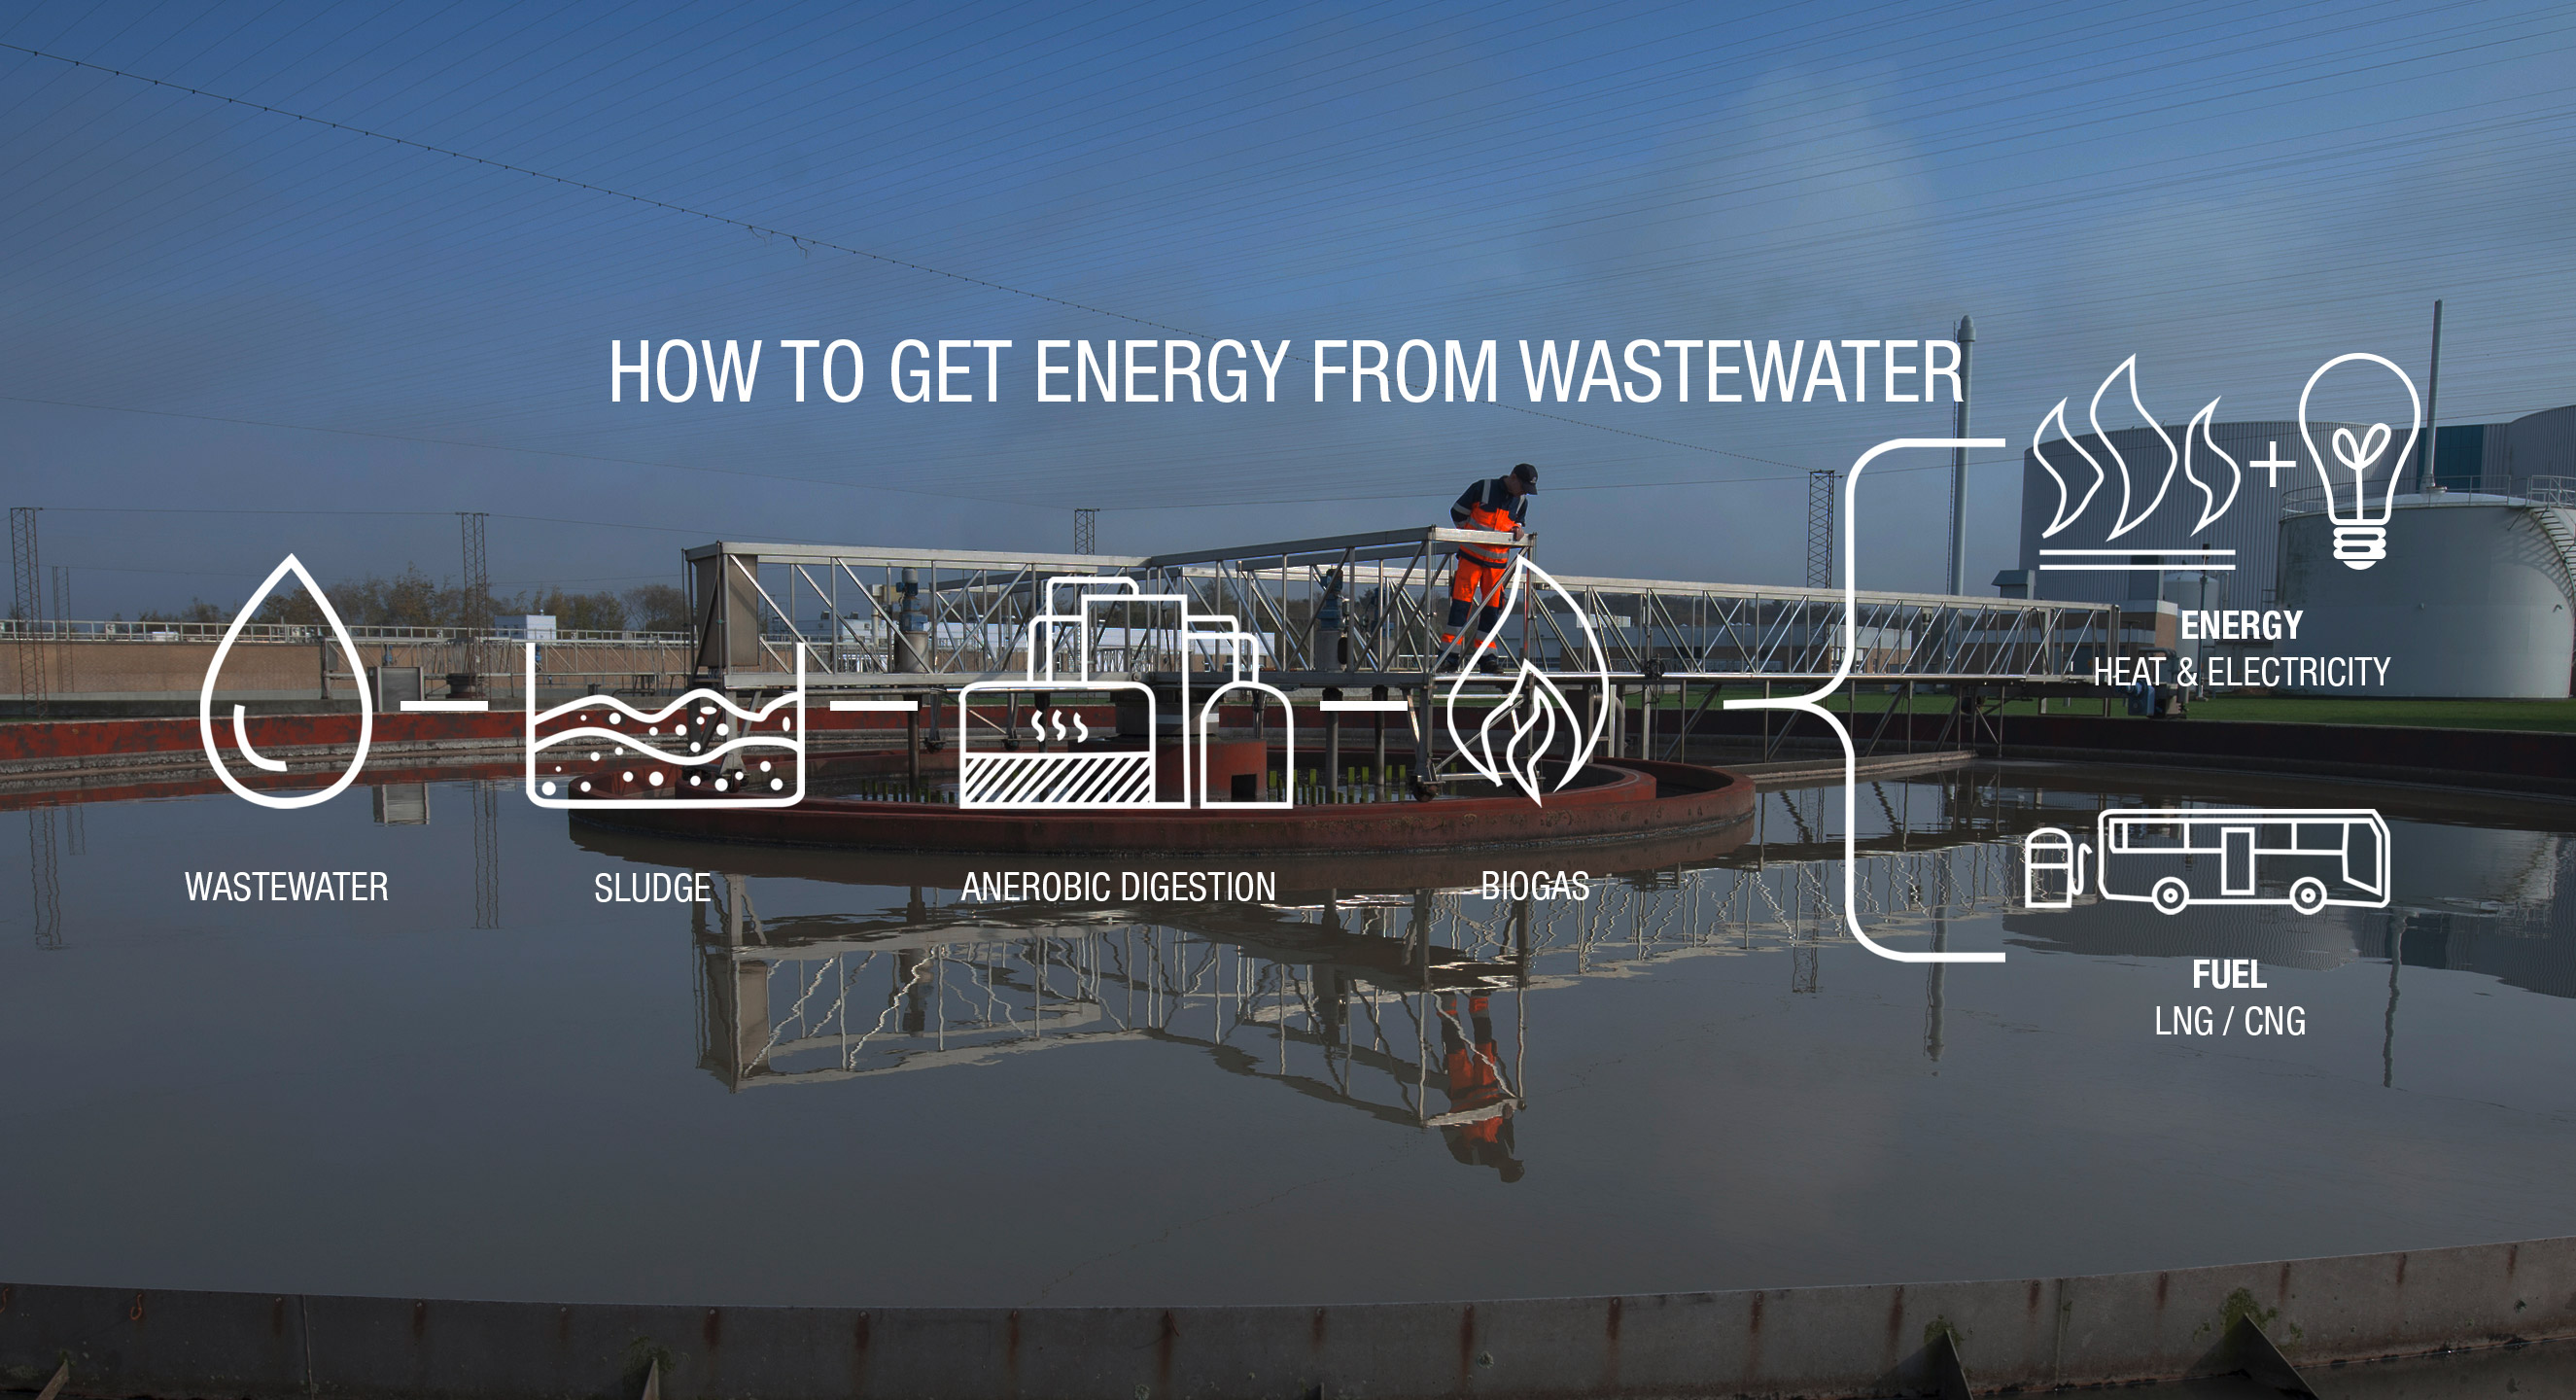 How to get energy from wastewater